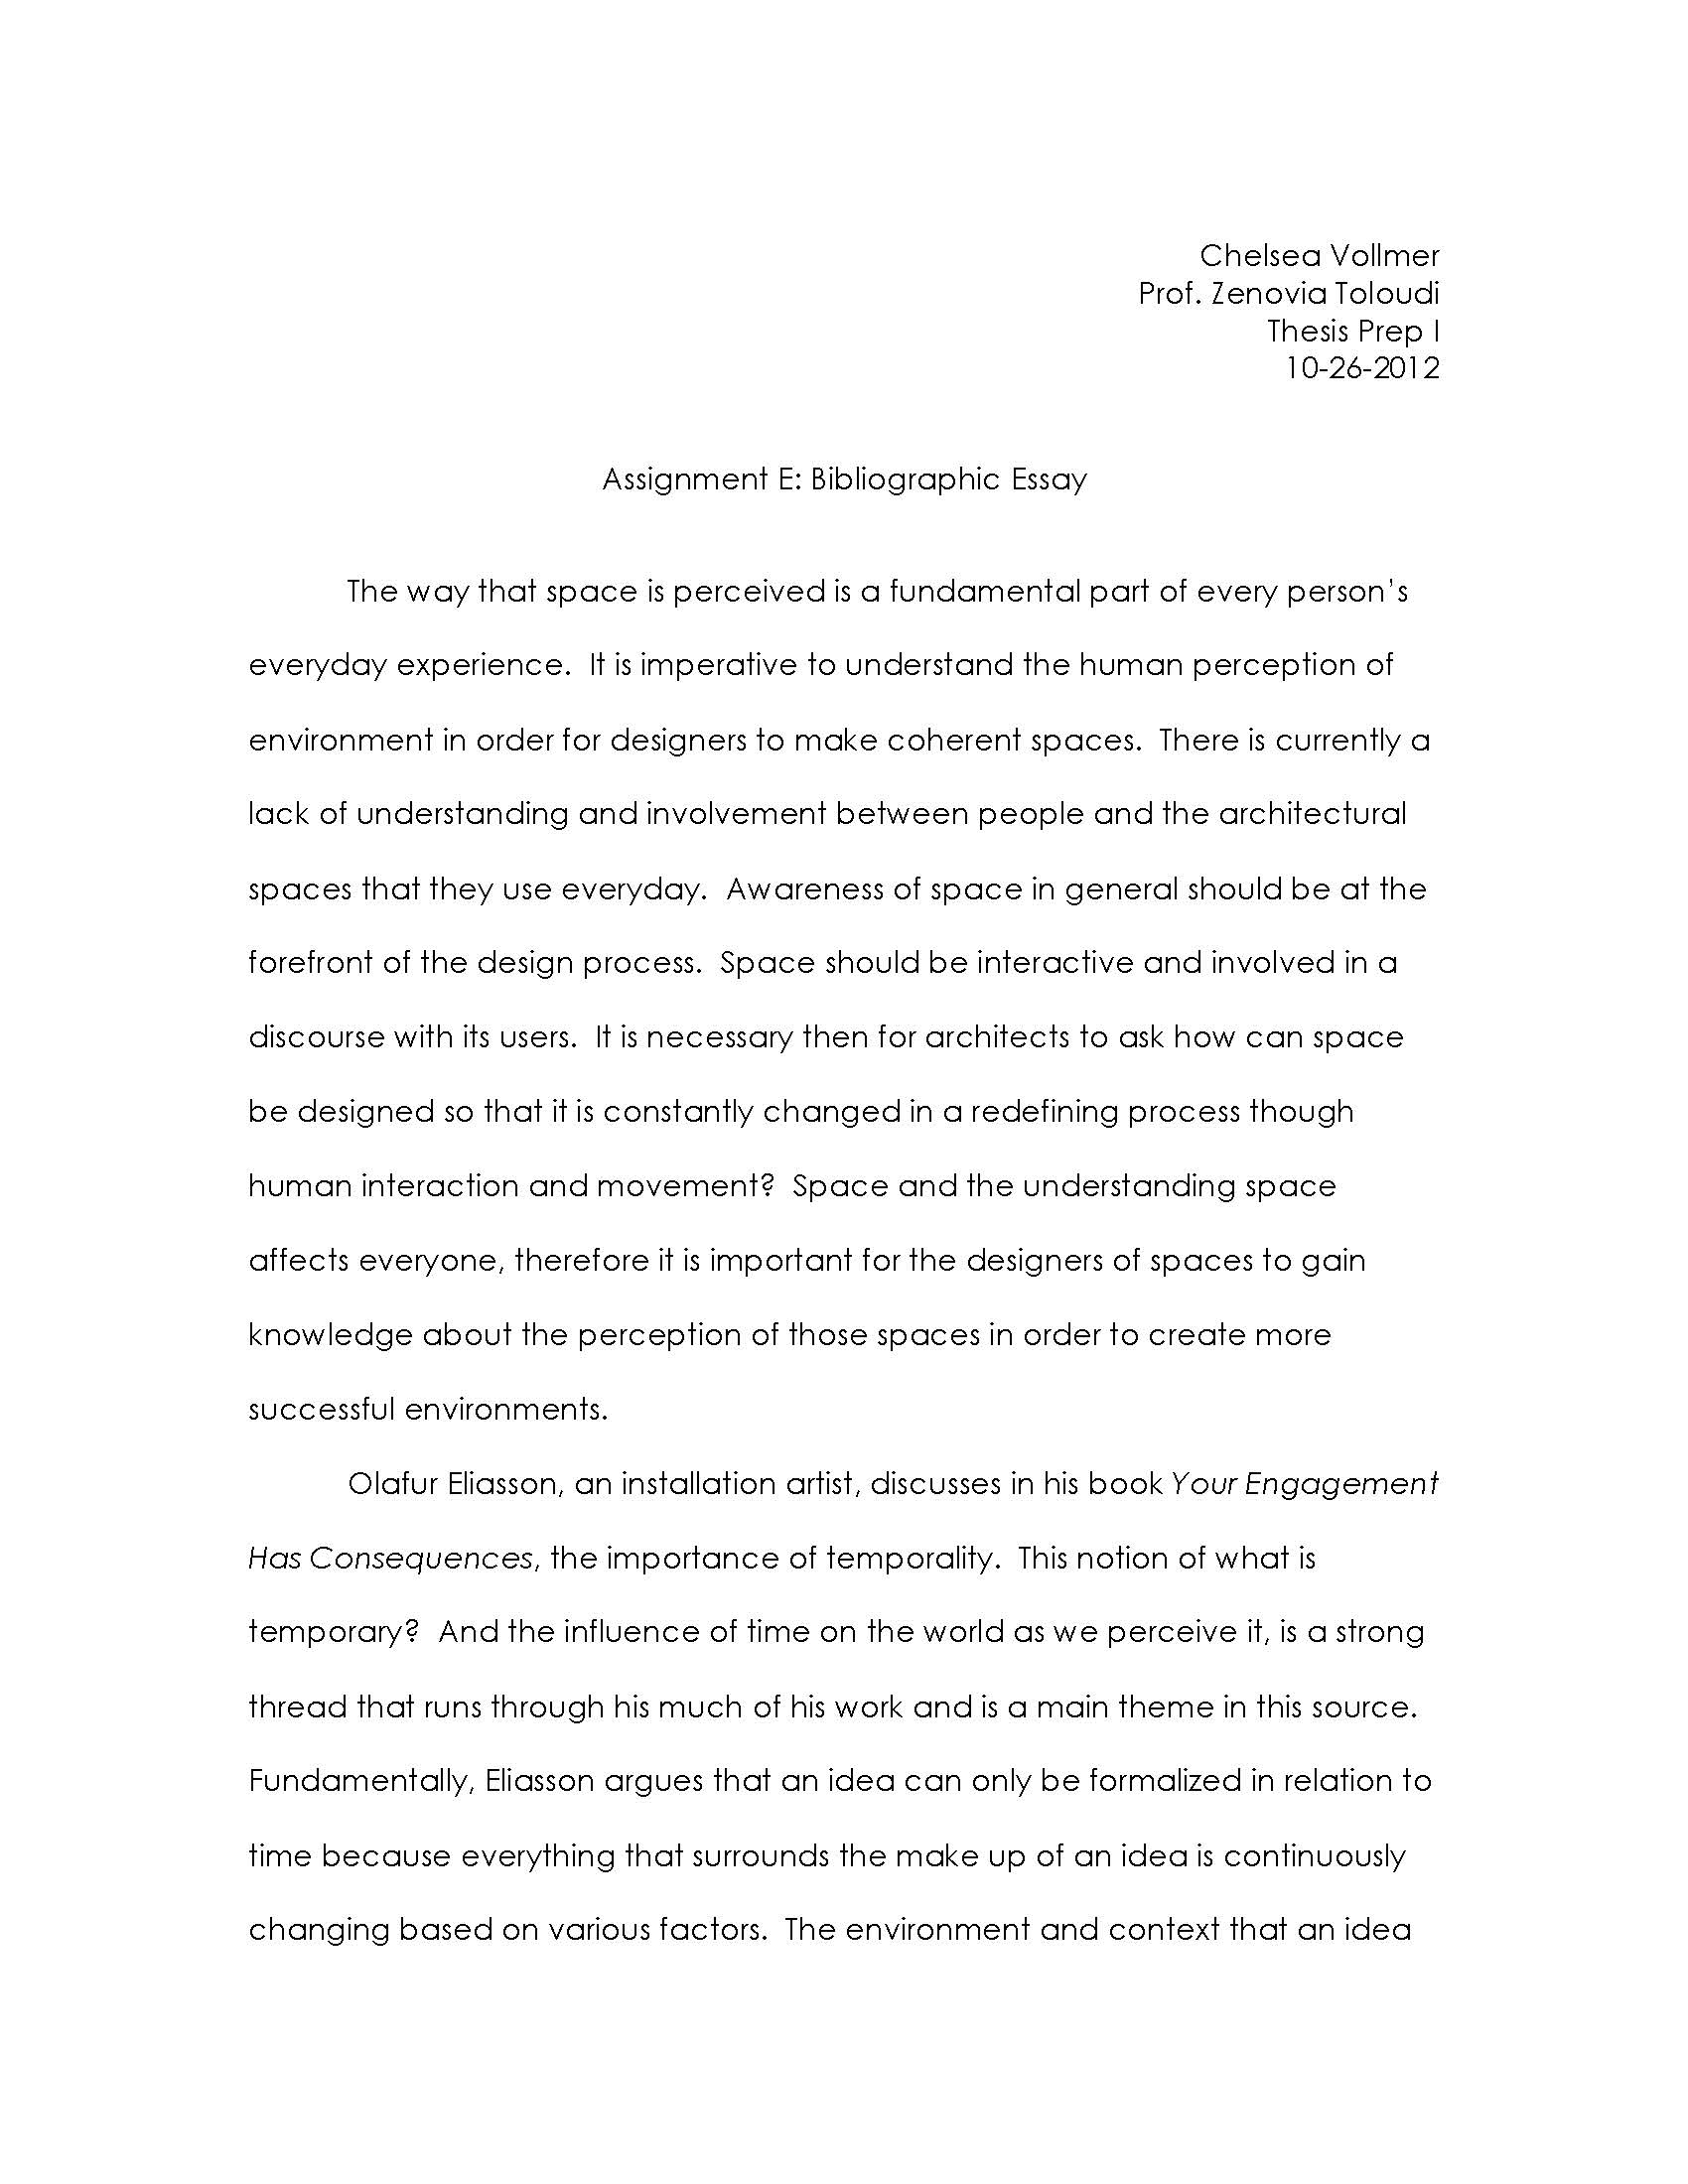 how to write a bibliography for an assignment of rents